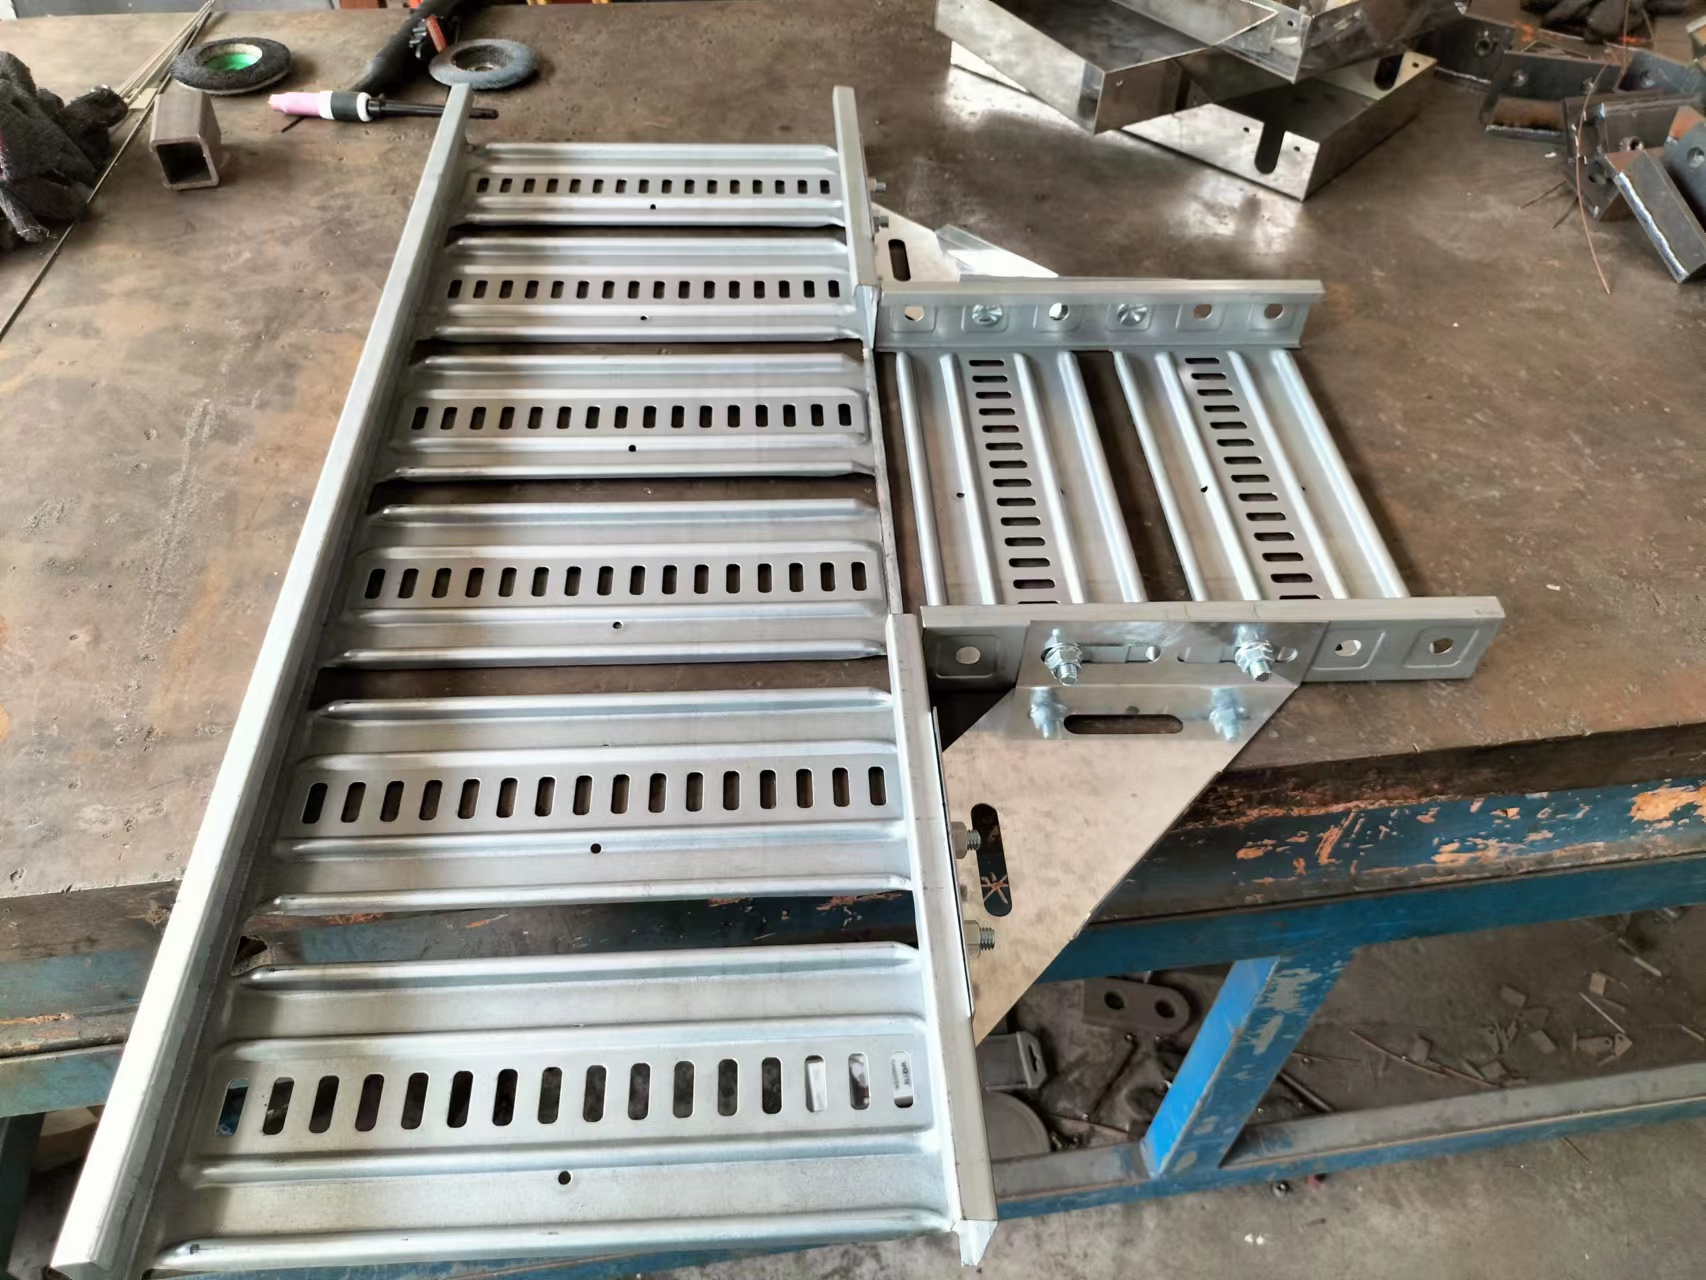 The TX tee/cross bracket is used to create a tee or cross connection between the lengths of the T3 cable tray.
A full range of T3 accessories can be provided to supplement the system and facilitate on-site manufacturing.
T3 fittings are applicable to all tray widths and can be used to make tee, riser, elbow and cross.